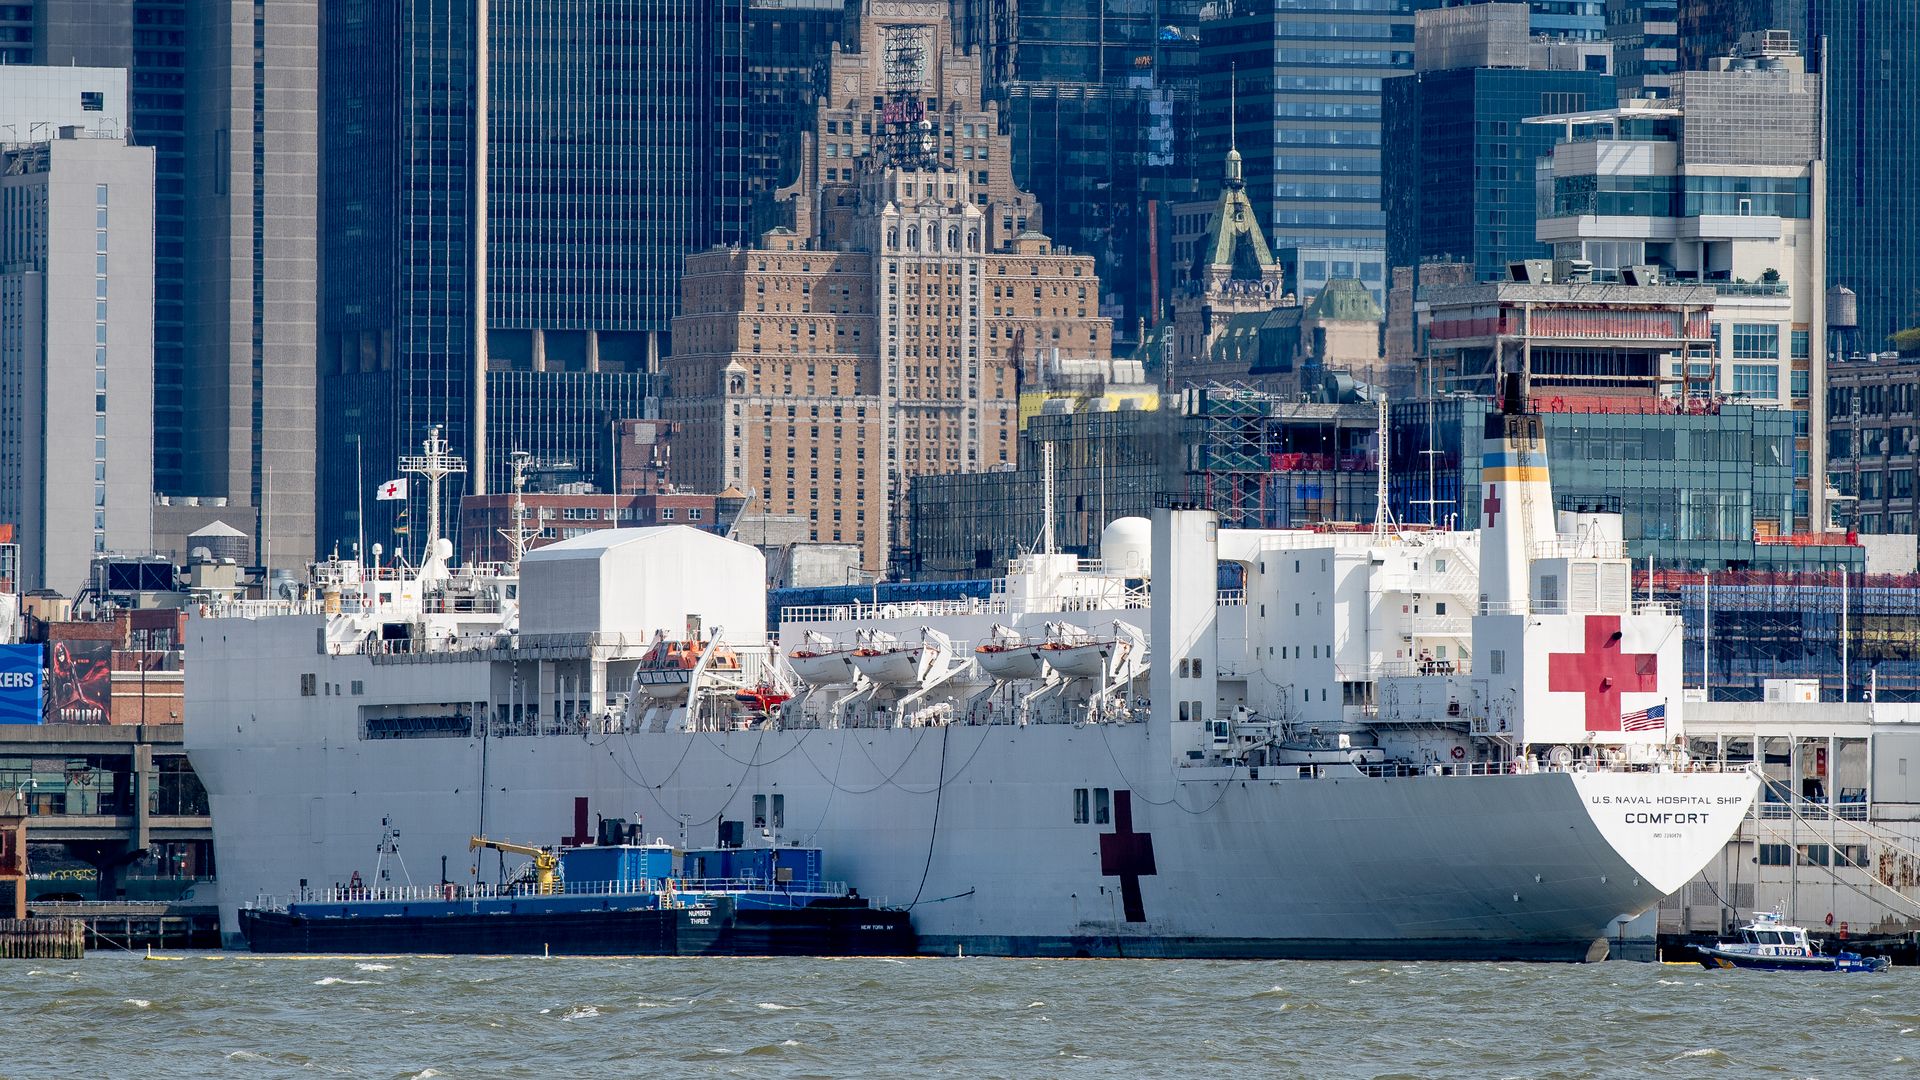 A view of the USNS Comfort docked at Pier 90 in Manhattan